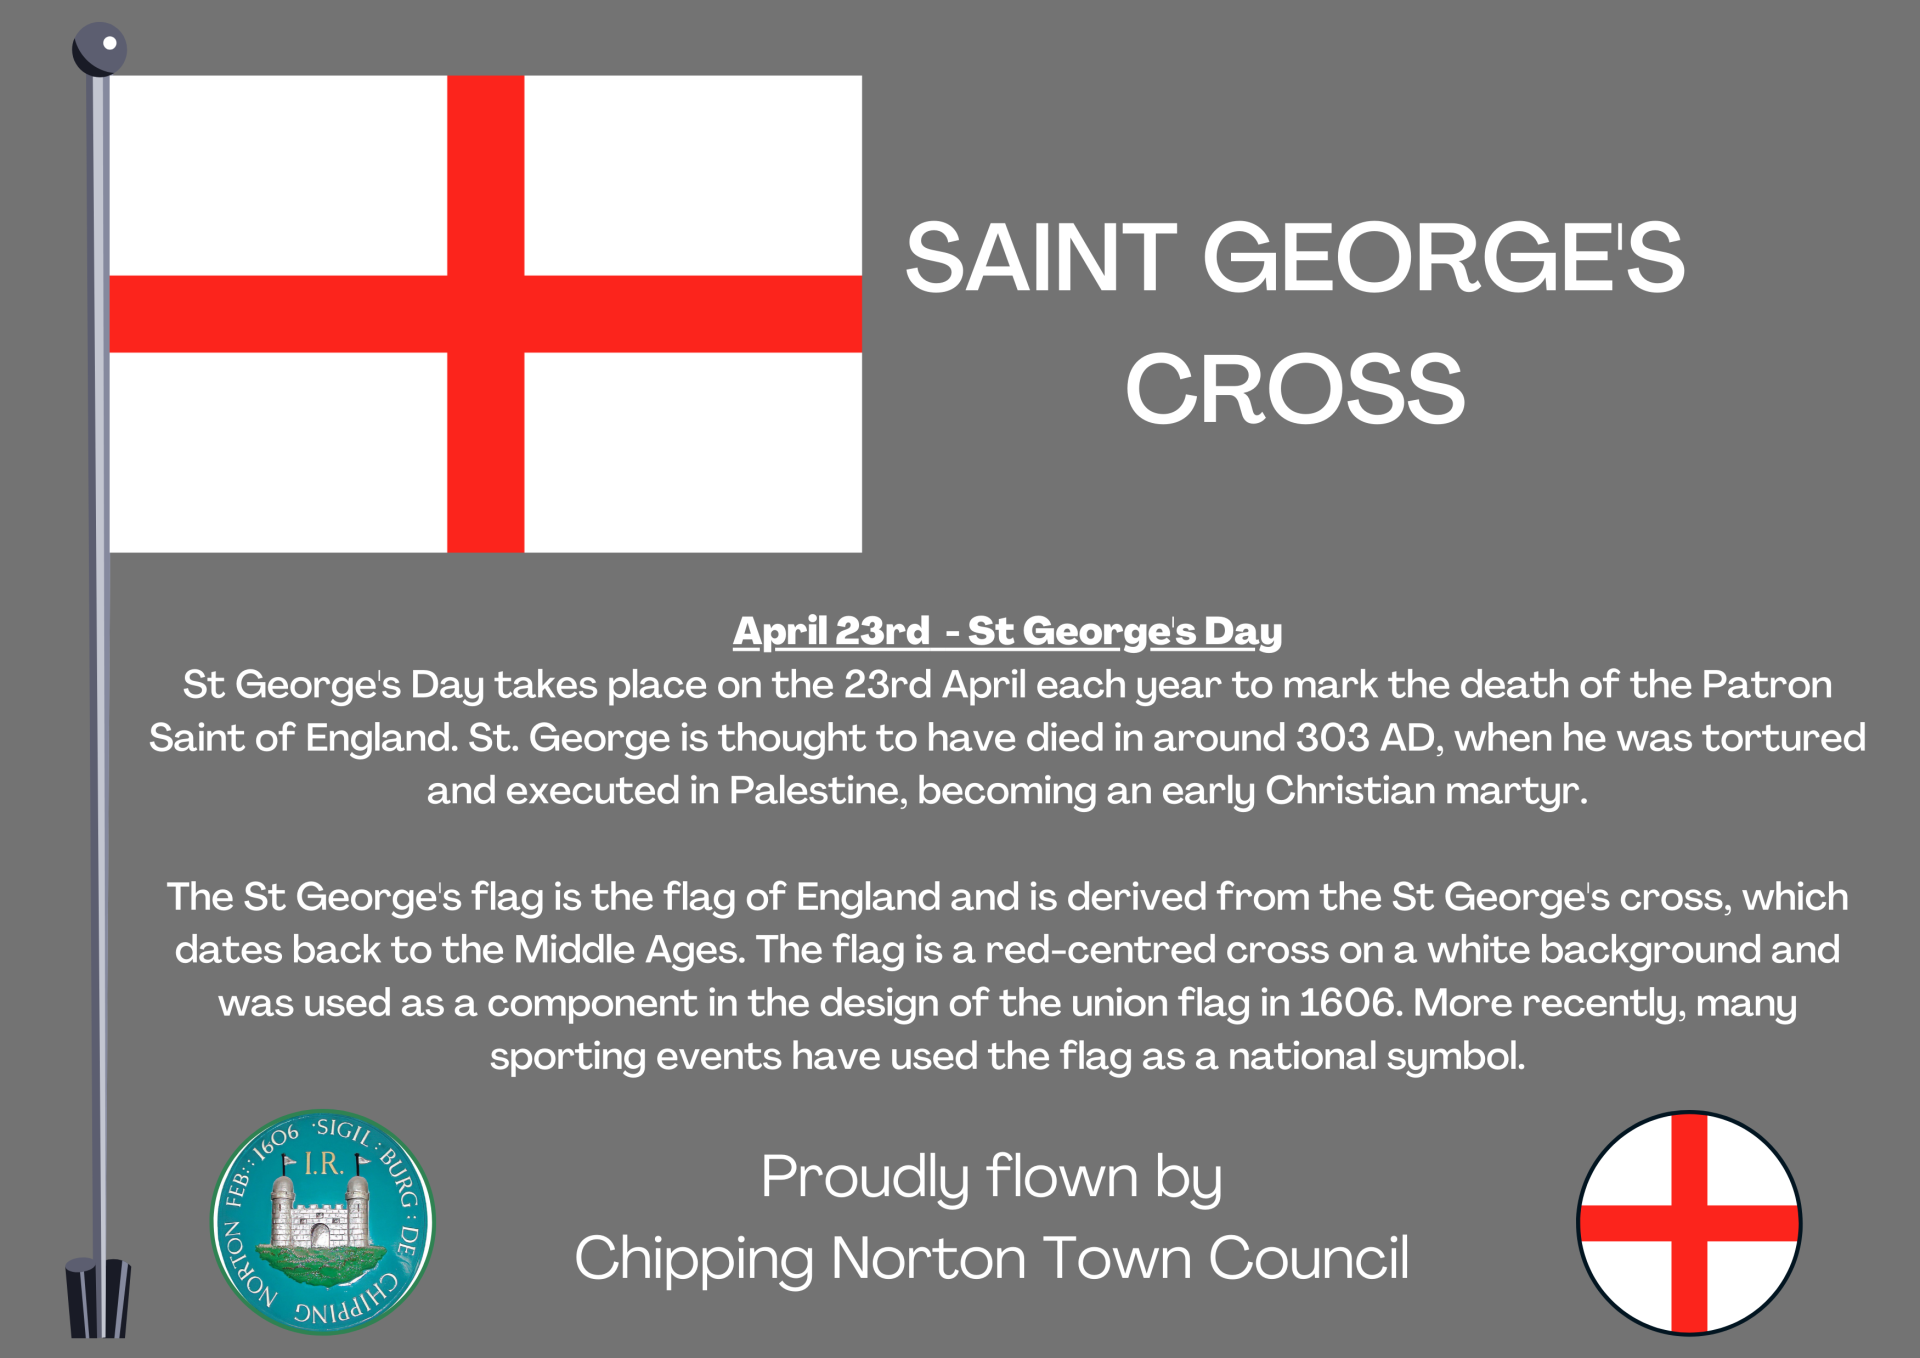 April 23rd  - St George's Day
St George's Day takes place on the 23rd April each year to mark the death of the Patron Saint of England. St. George is thought to have died in around 303 AD, when he was tortured and executed in Palestine, becoming an early Christian martyr.

The St George's flag is the flag of England and is derived from the St George's cross, which dates back to the Middle Ages. The flag is a red-centred cross on a white background and was used as a component in the design of the union flag in 1606. More recently, many sporting events have used the flag as a national symbol.